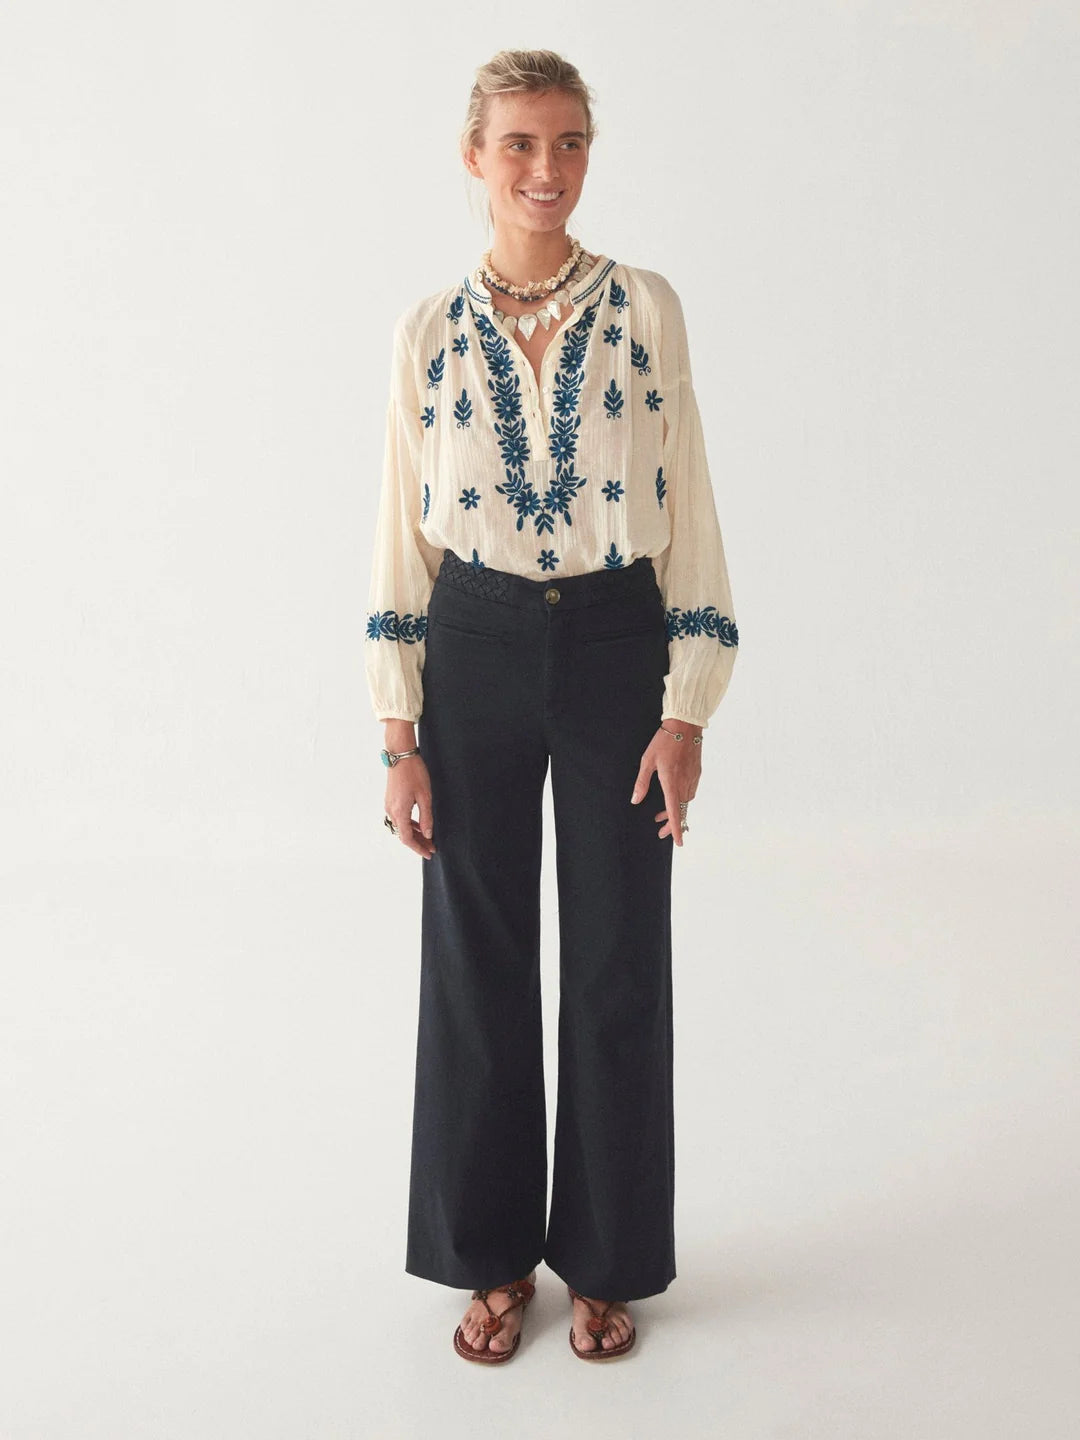 Model wears cream boho blouse with blue floral pattern on the front and cuffs